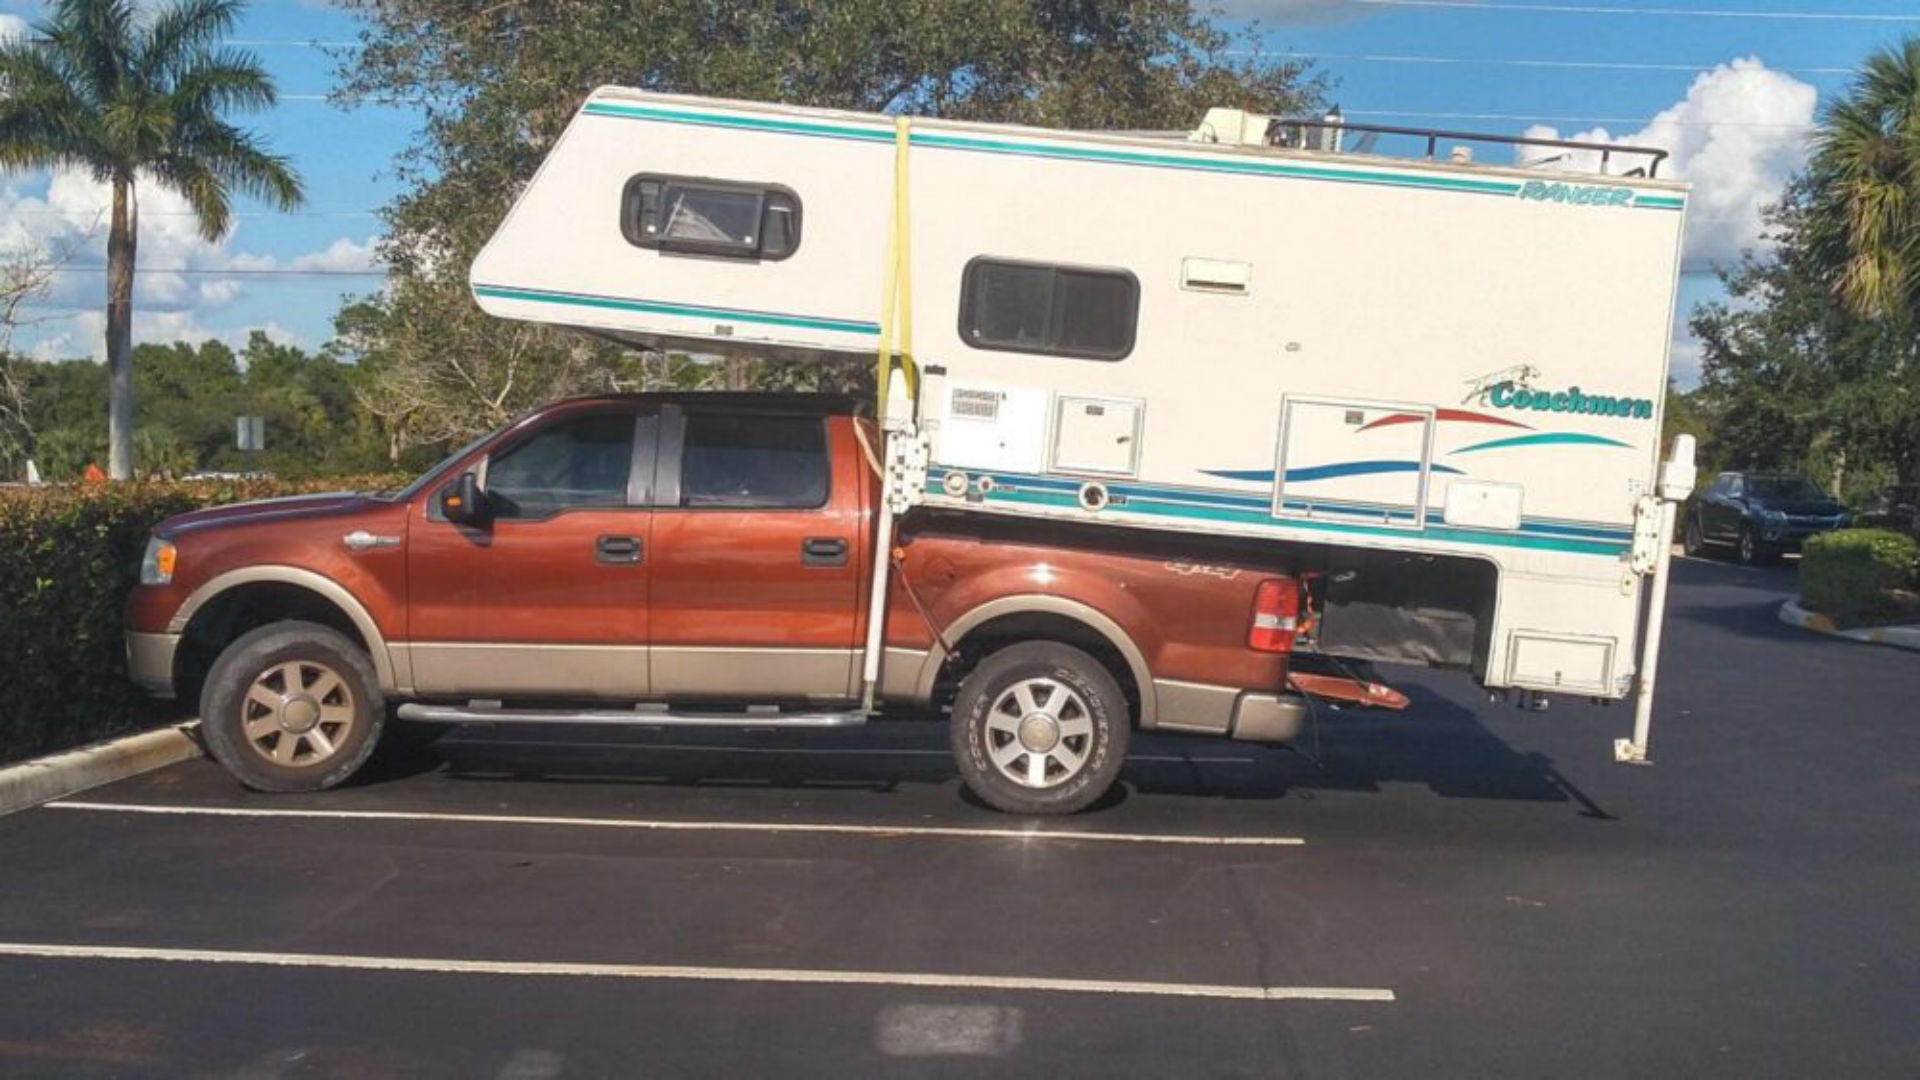 https://www.thedrive.com/content/2019/12/F-150-Camper-Hero.jpg?quality=85